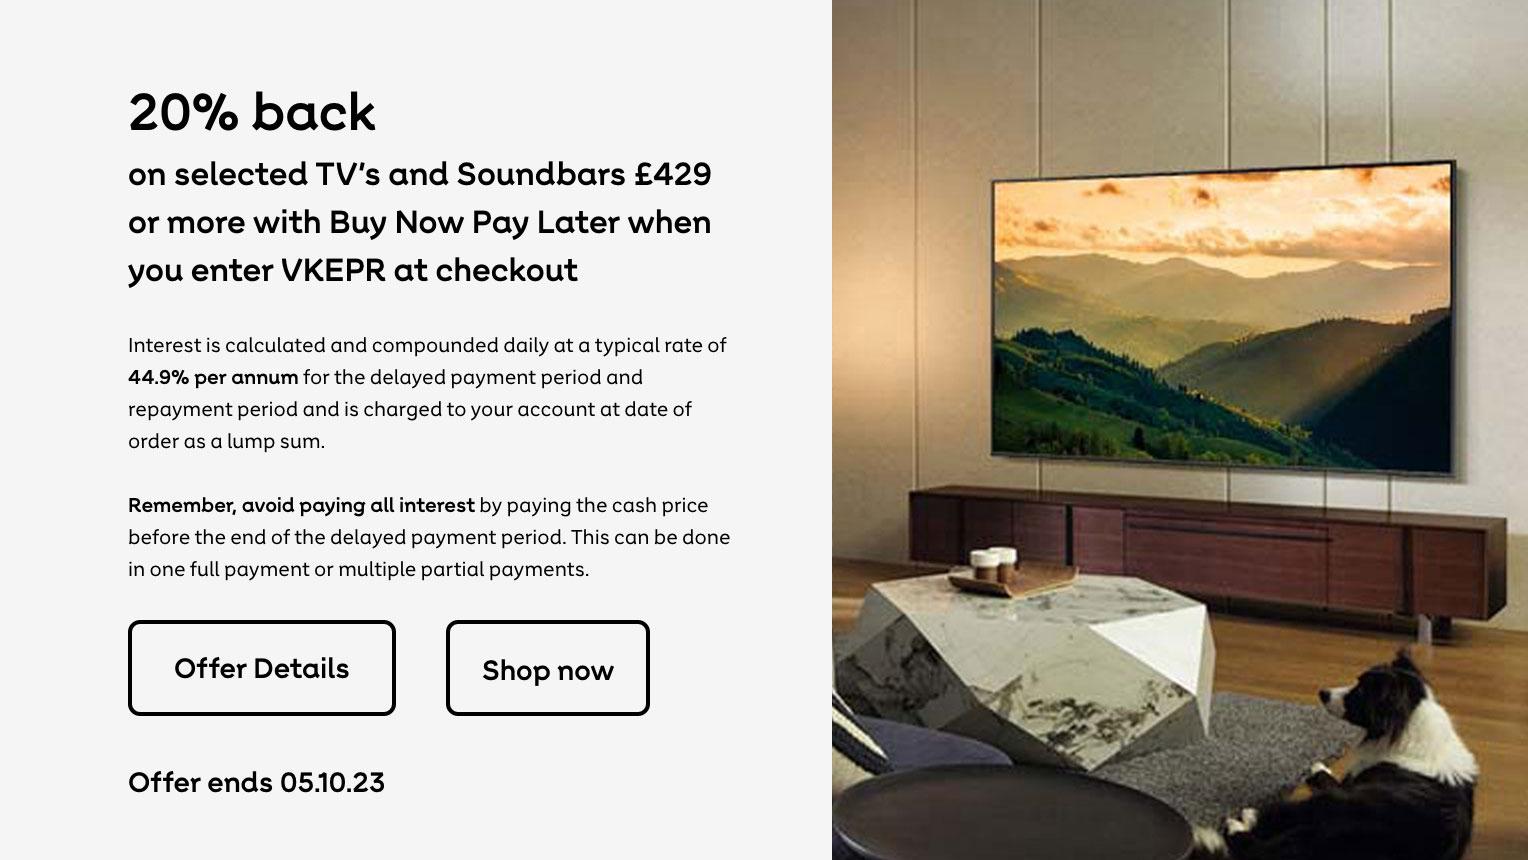 20% back on selected TV's and Soundbars £429 or more on when you enter VKEPR at checkout. Offer Ends 05.10.23